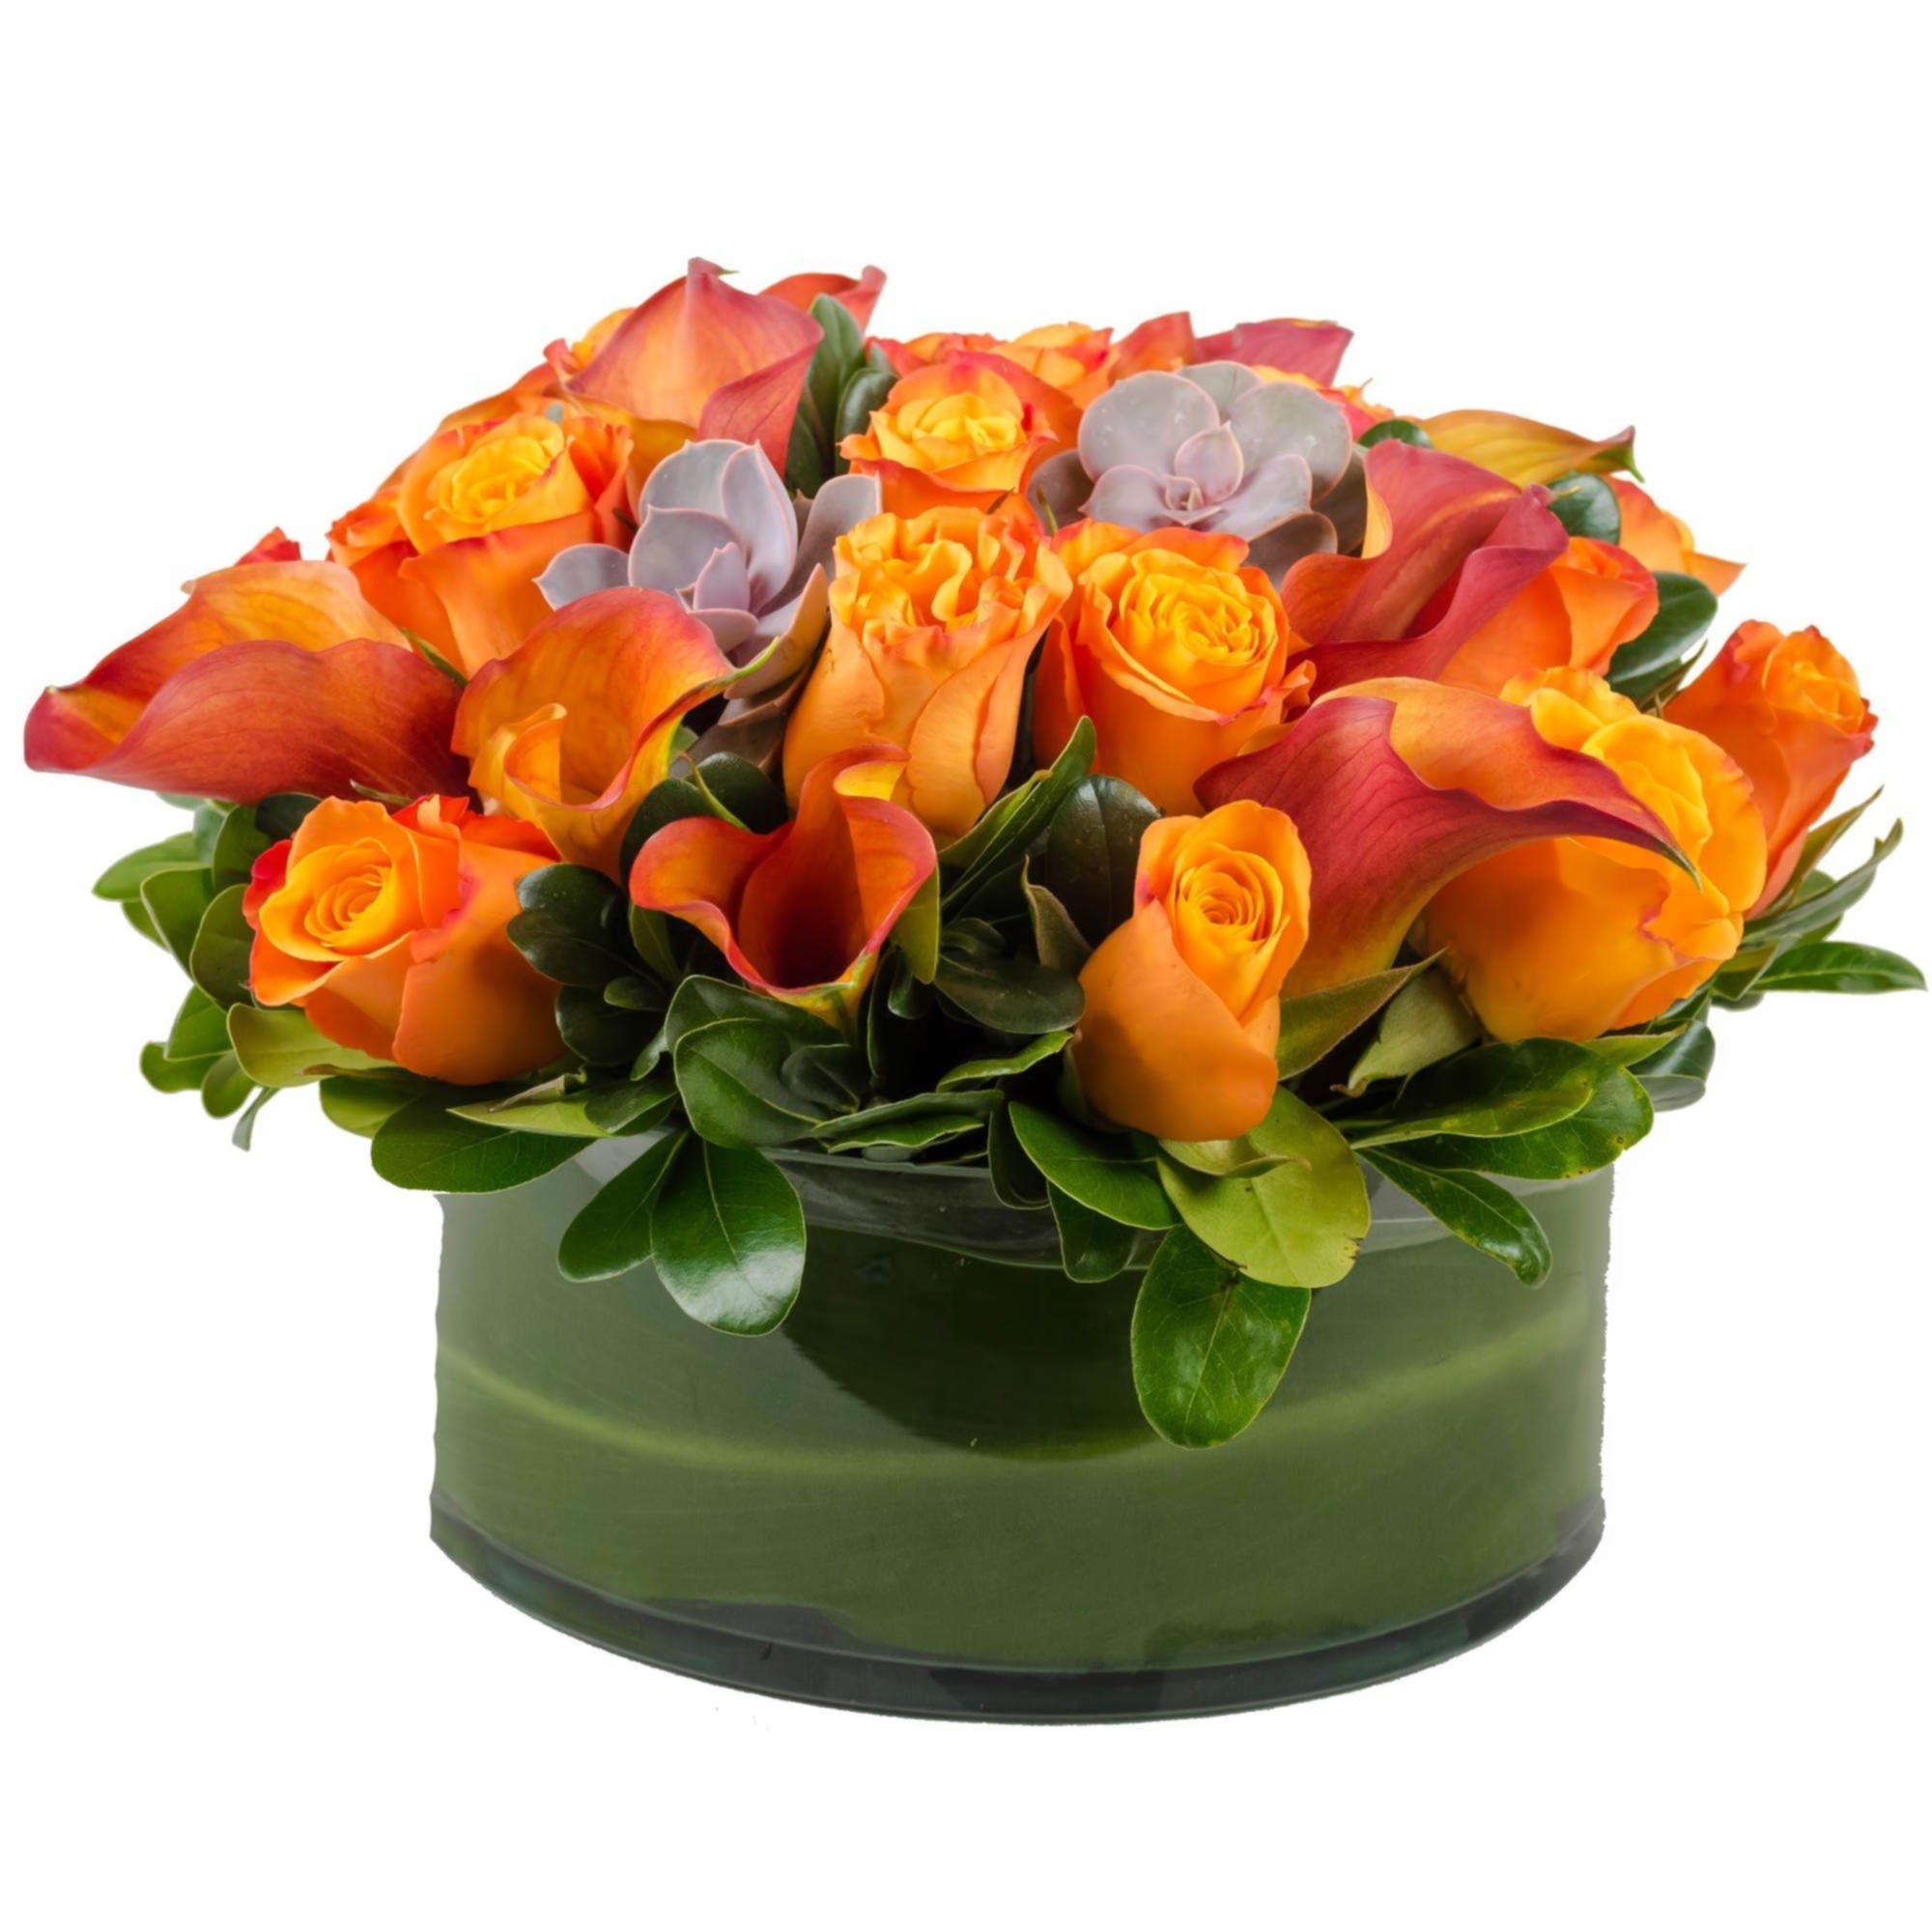 Orange You Amazing Floral Arrangement by Queens Flower Delivery put together with orange roses, Calla Lily, and succulents.